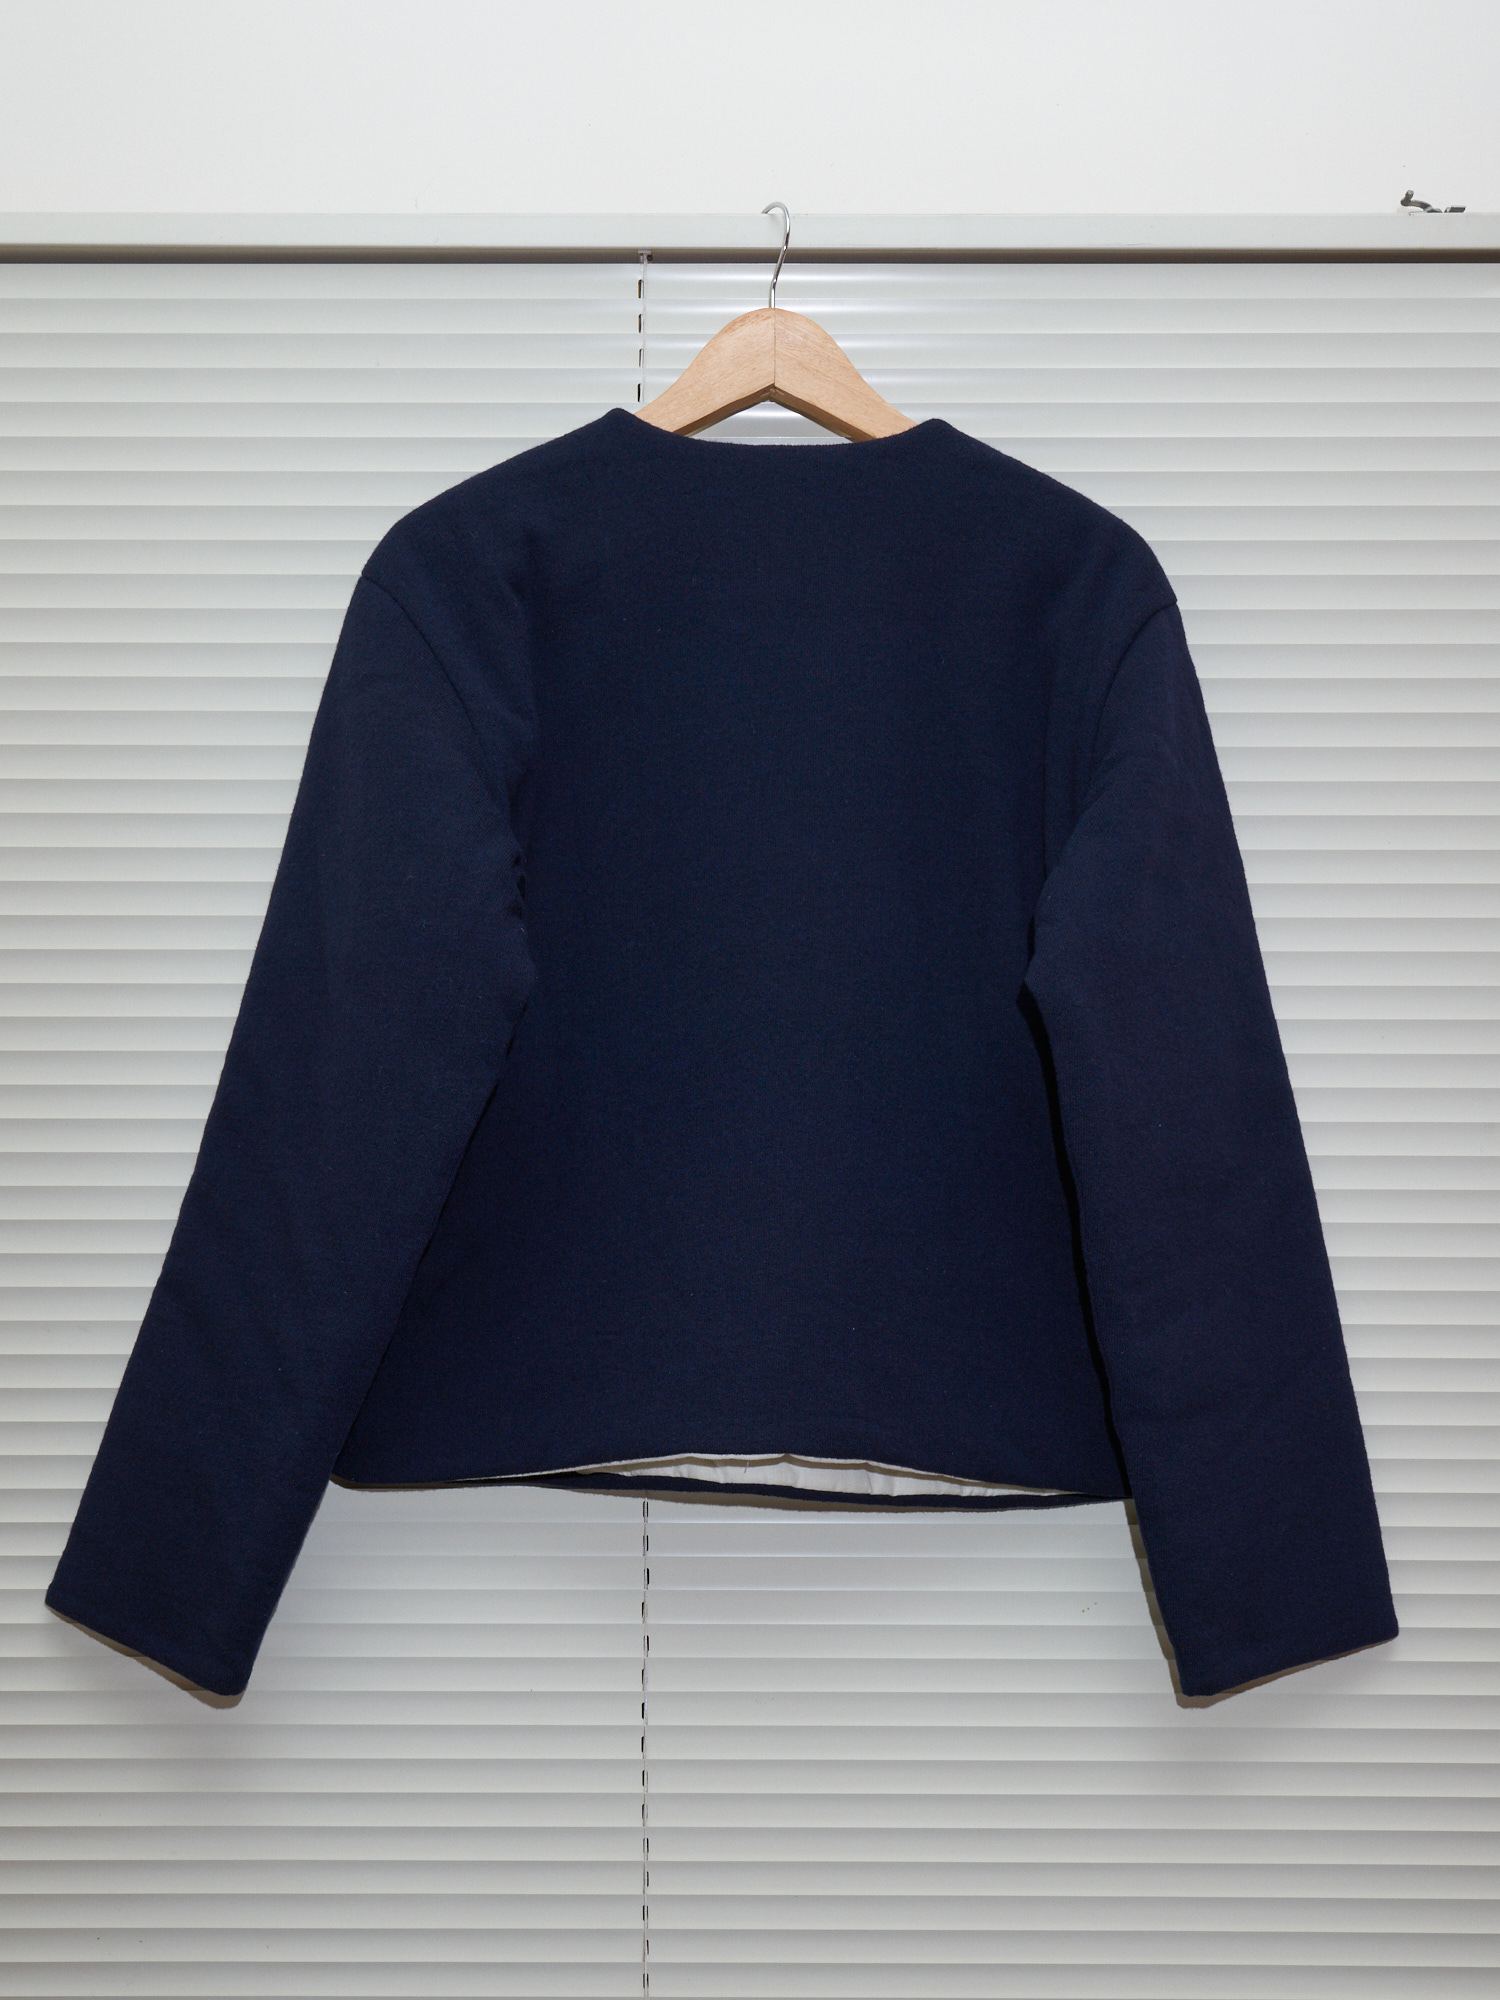 Comme des Garcons Homme 1997 navy wool jersey padded v neck sweater - mens M S